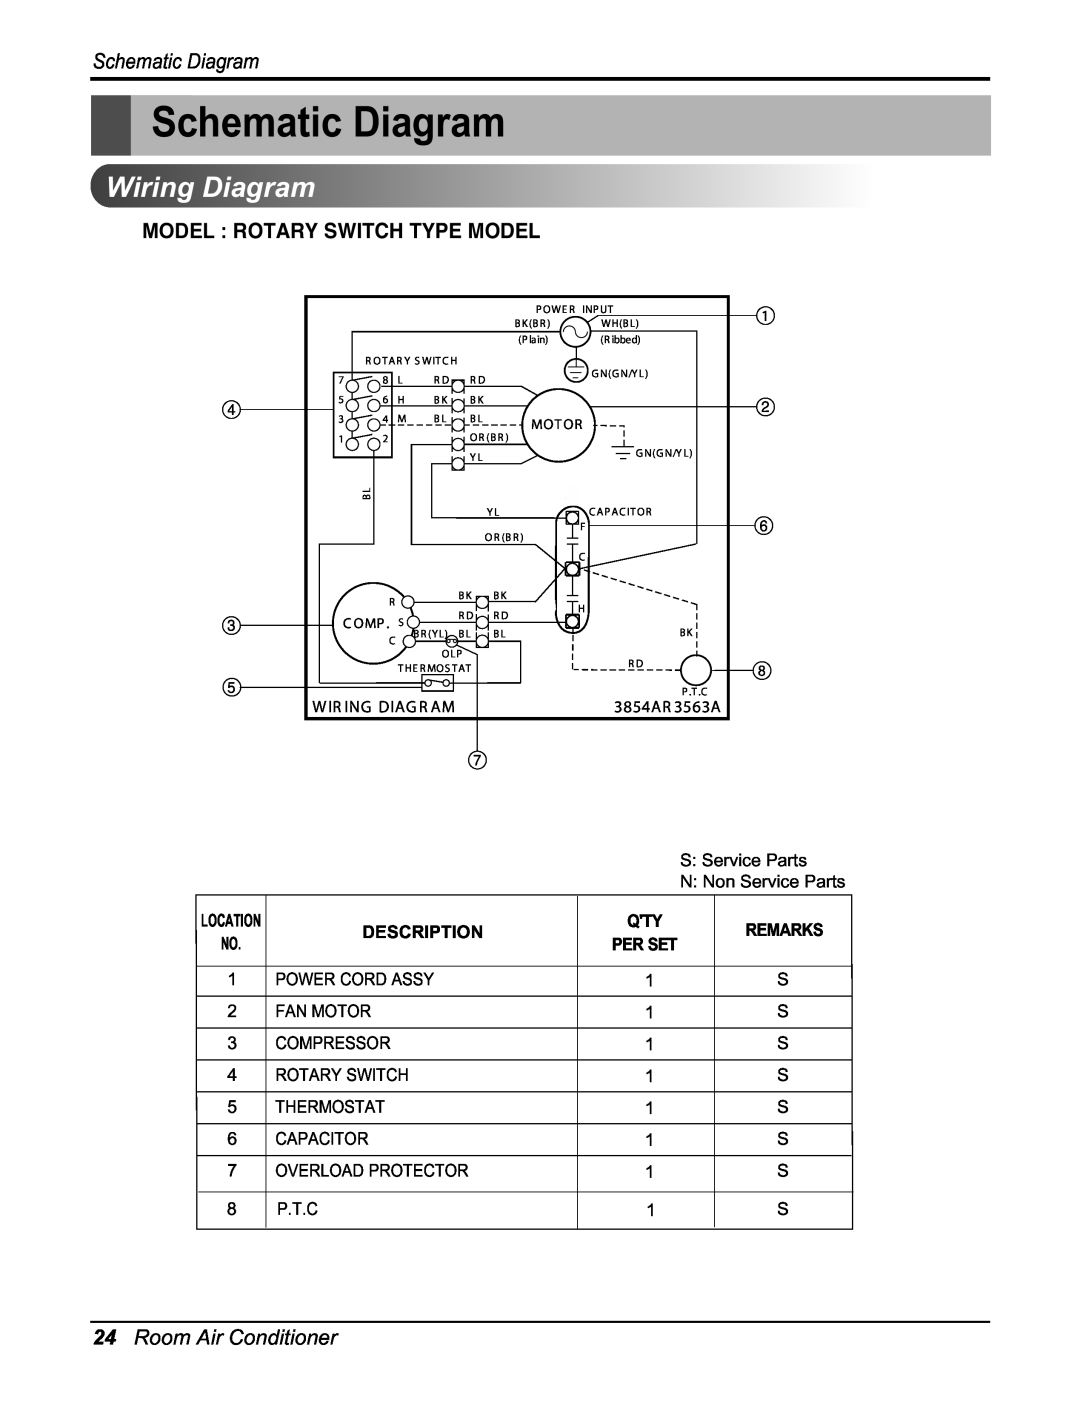 Heat Controller RAD-101A Schematic Diagram, Wiring Diagram, Model Rotary Switch Type Model, Room Air Conditioner, Per Set 